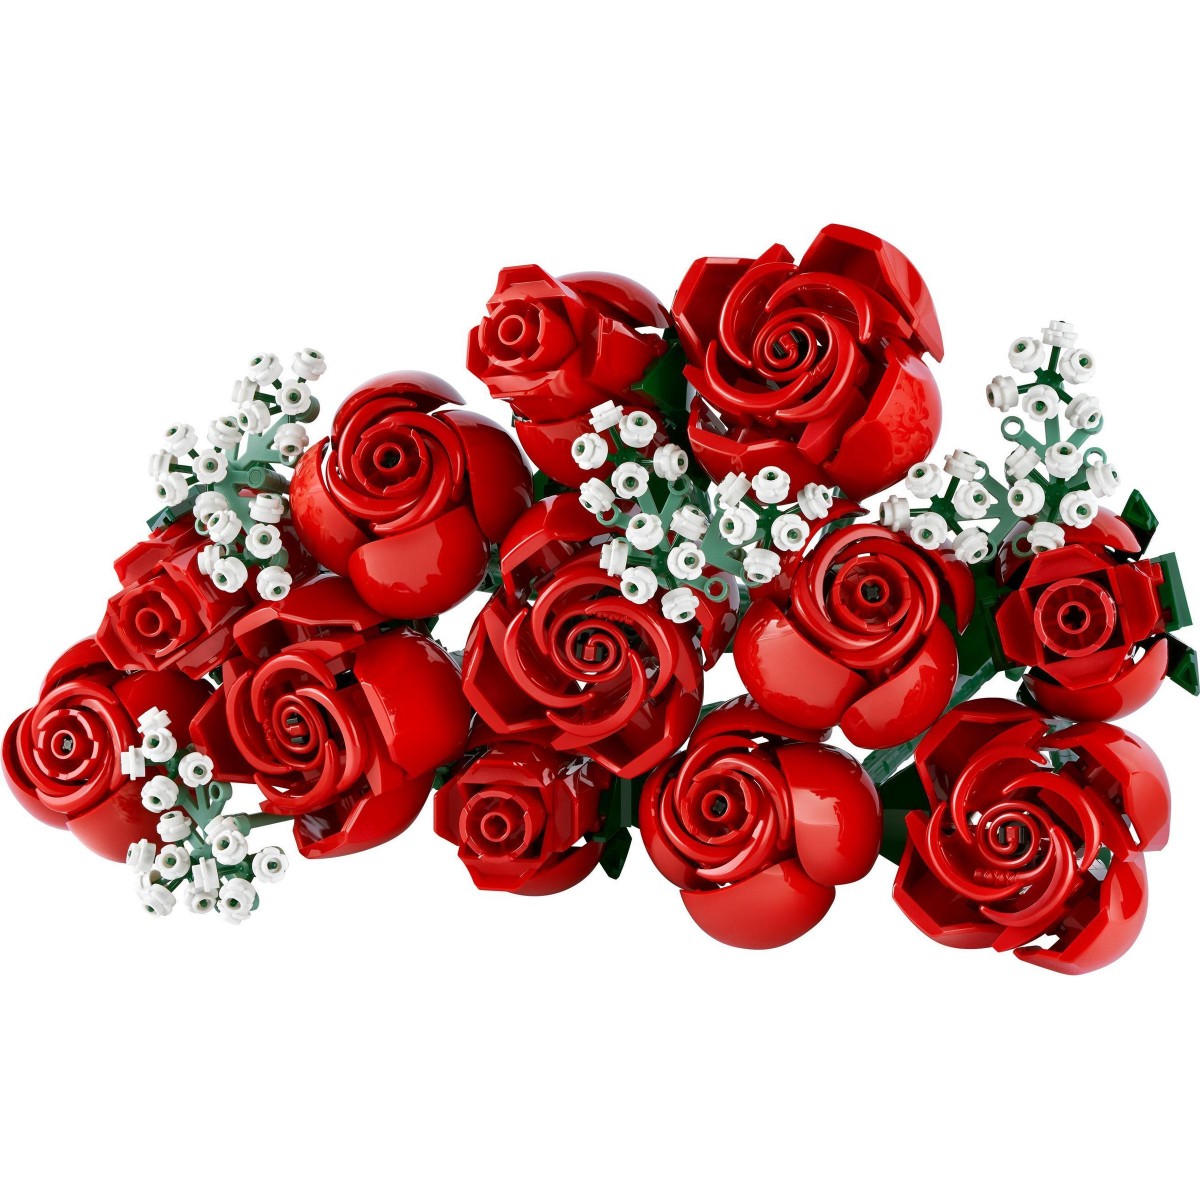 LEGO 10328 Icons Bouquet of Roses Flowers Set for Adults